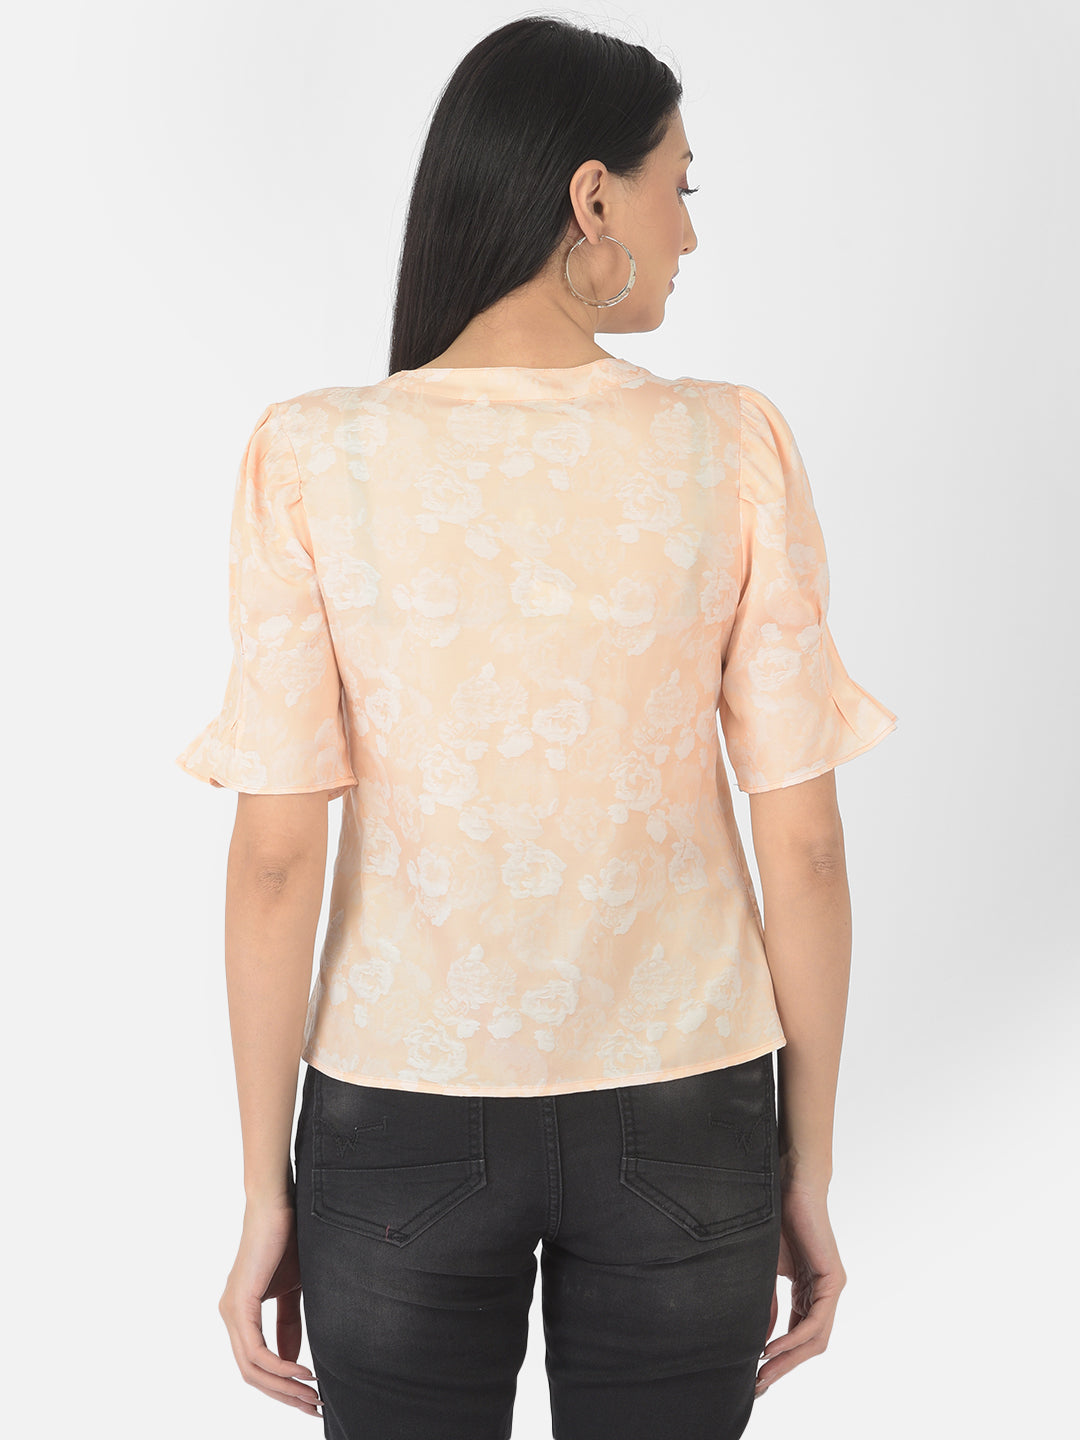 Peach Short Sleeve Solid Polyester Blouse